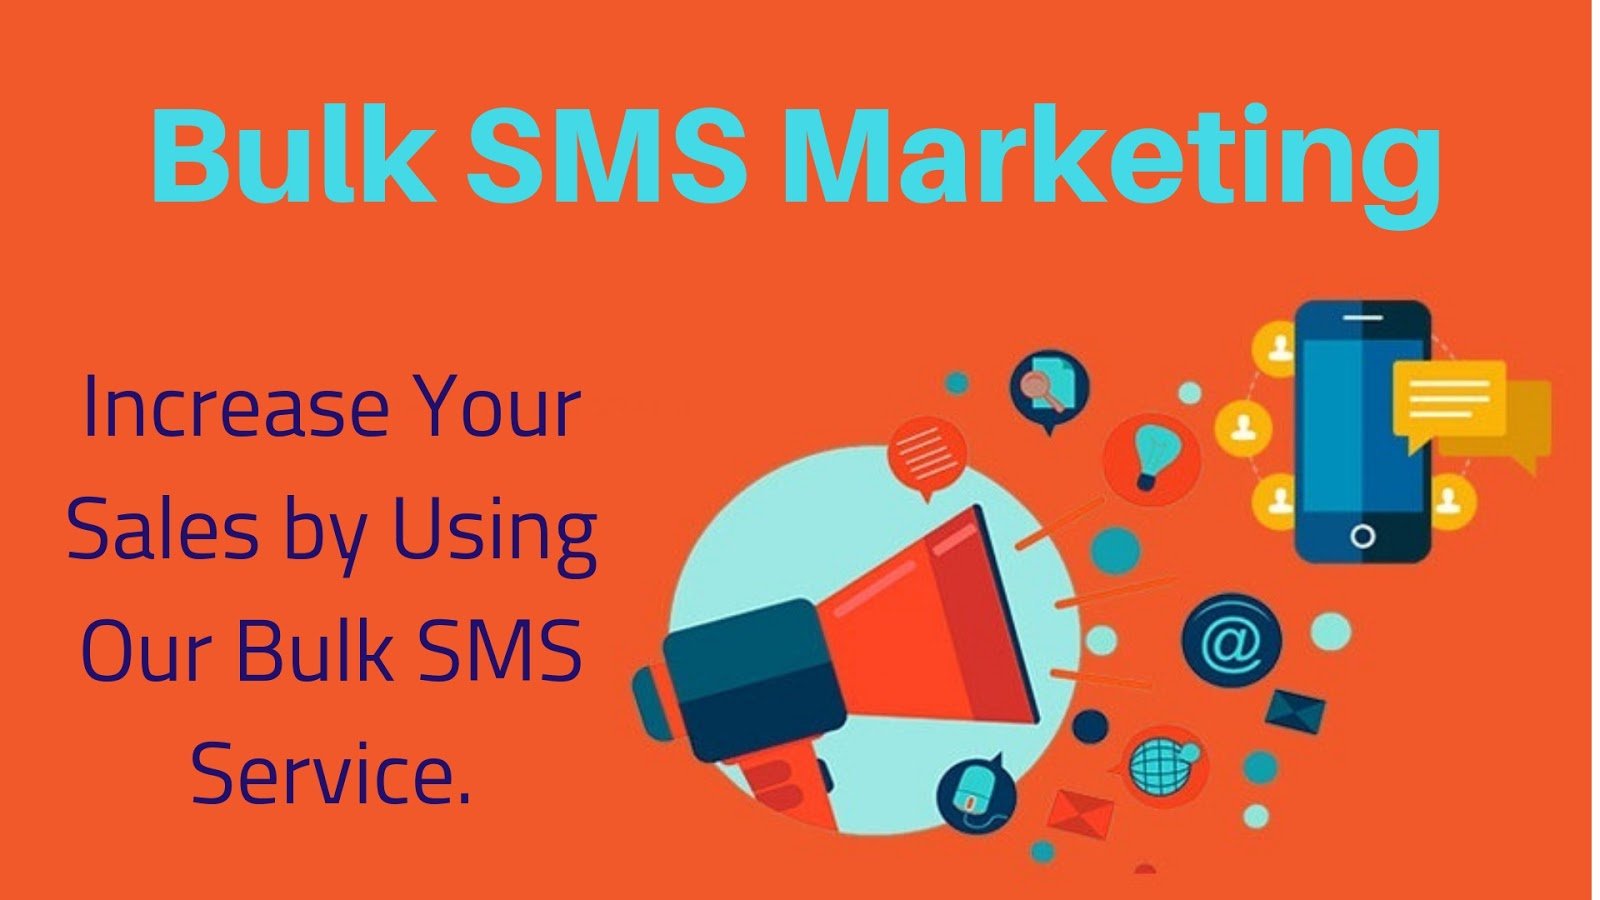 All Bulk SMS Questions & Answers